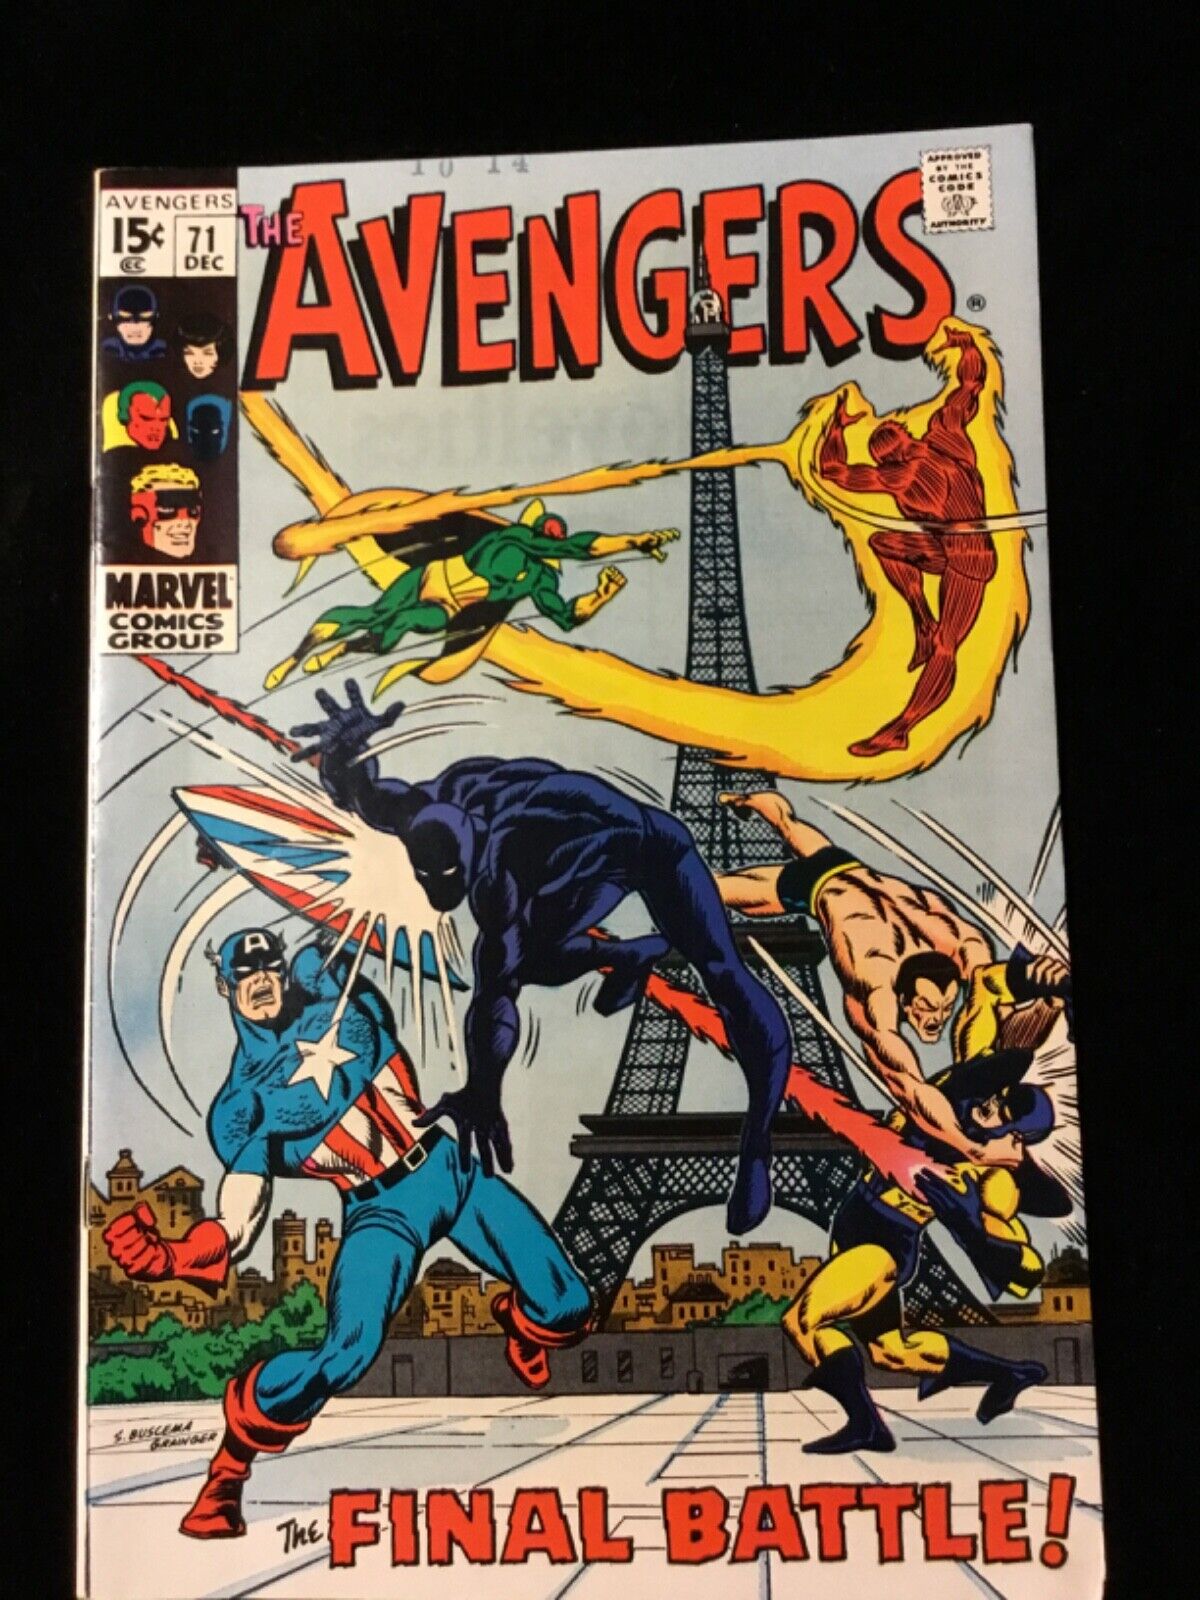 The Avengers #71  The Final Battle  First Appearance of Invaders  Black Knight